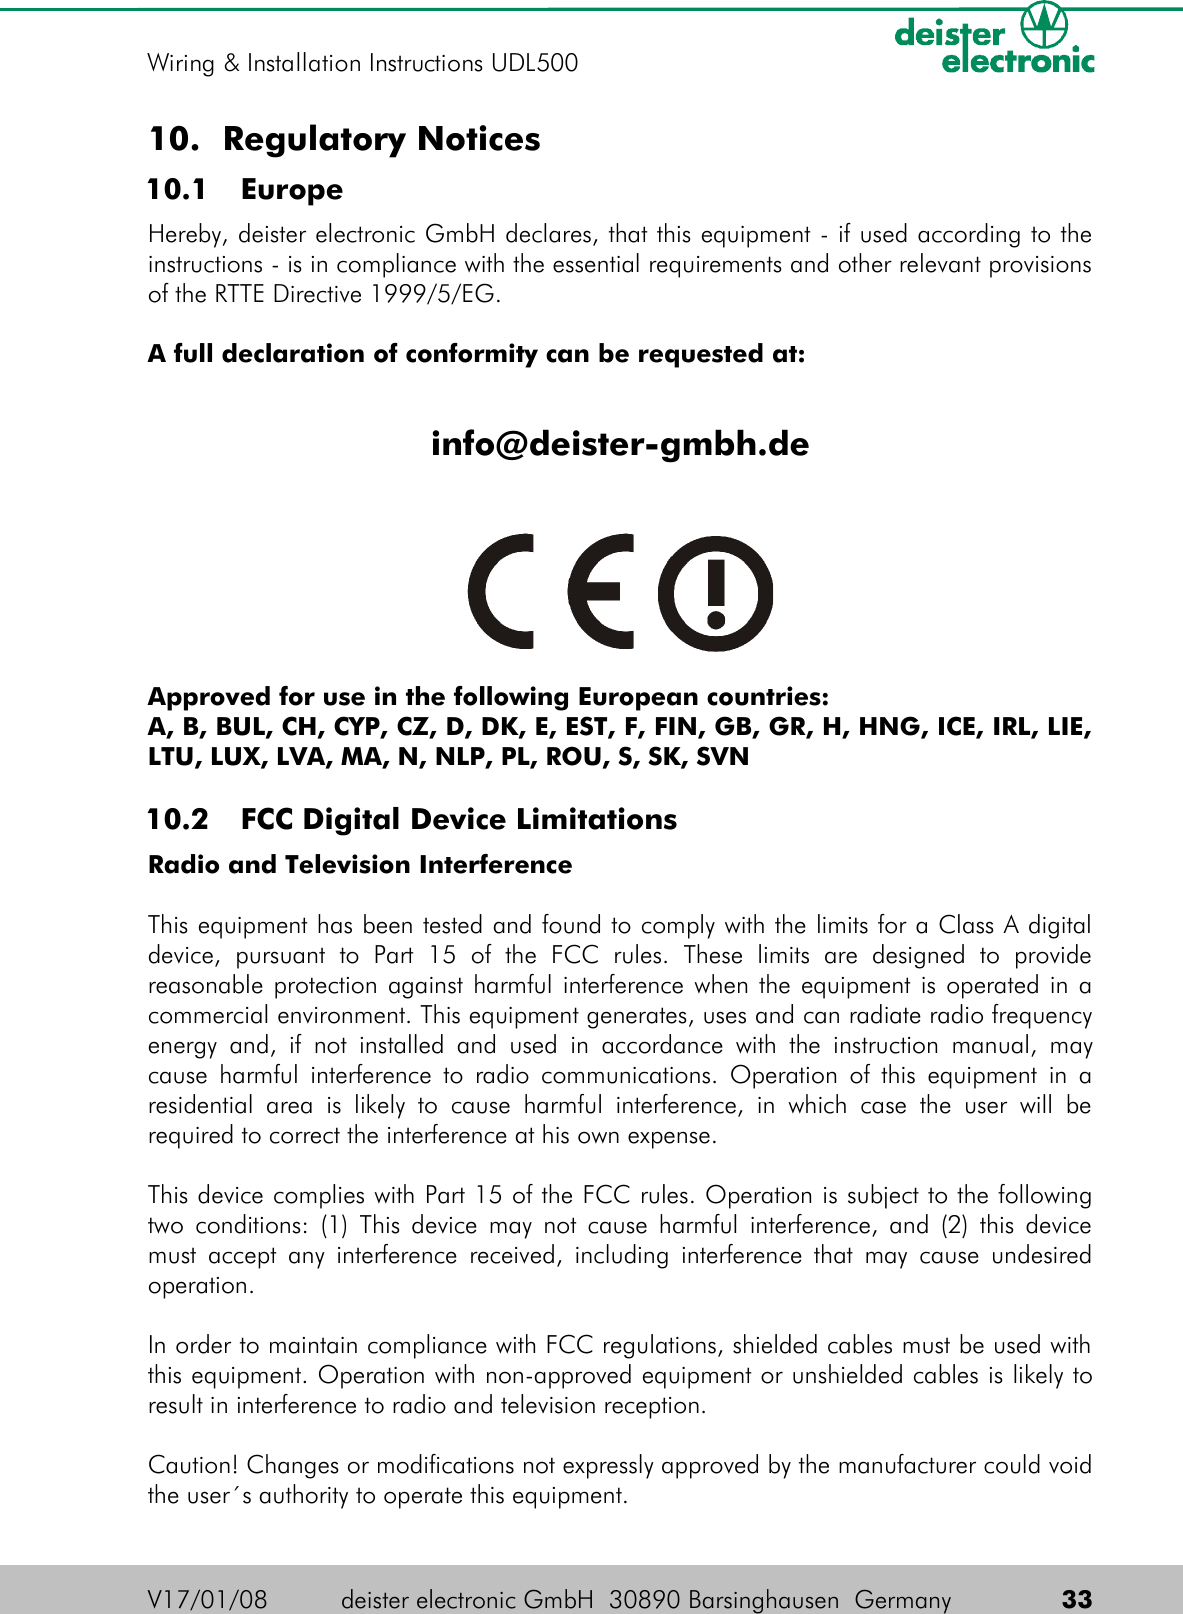 10. Regulatory Notices 10.1  EuropeHereby, deister electronic GmbH declares, that this equipment - if used according to the instructions - is in compliance with the essential requirements and other relevant provisions of the RTTE Directive 1999/5/EG.A full declaration of conformity can be requested at:info@deister-gmbh.deApproved for use in the following European countries:A, B, BUL, CH, CYP, CZ, D, DK, E, EST, F, FIN, GB, GR, H, HNG, ICE, IRL, LIE, LTU, LUX, LVA, MA, N, NLP, PL, ROU, S, SK, SVN 10.2  FCC Digital Device LimitationsRadio and Television InterferenceThis equipment has been tested and found to comply with the limits for a Class A digital device,   pursuant   to   Part   15   of   the   FCC   rules.   These   limits   are   designed   to   provide reasonable protection against harmful interference when the equipment is operated in a commercial environment. This equipment generates, uses and can radiate radio frequency energy and, if not installed and used in accordance with the instruction manual, may cause harmful interference to radio communications. Operation of this equipment in a residential area  is likely to  cause harmful  interference,  in which  case the  user  will be required to correct the interference at his own expense.This device complies with Part 15 of the FCC rules. Operation is subject to the following two conditions: (1) This device may not cause harmful interference, and (2) this device must accept any interference received, including interference that may cause undesired operation.In order to maintain compliance with FCC regulations, shielded cables must be used with this equipment. Operation with non-approved equipment or unshielded cables is likely to result in interference to radio and television reception.Caution! Changes or modifications not expressly approved by the manufacturer could void the user´s authority to operate this equipment.V17/01/08 deister electronic GmbH  30890 Barsinghausen  Germany  33Wiring &amp; Installation Instructions UDL500